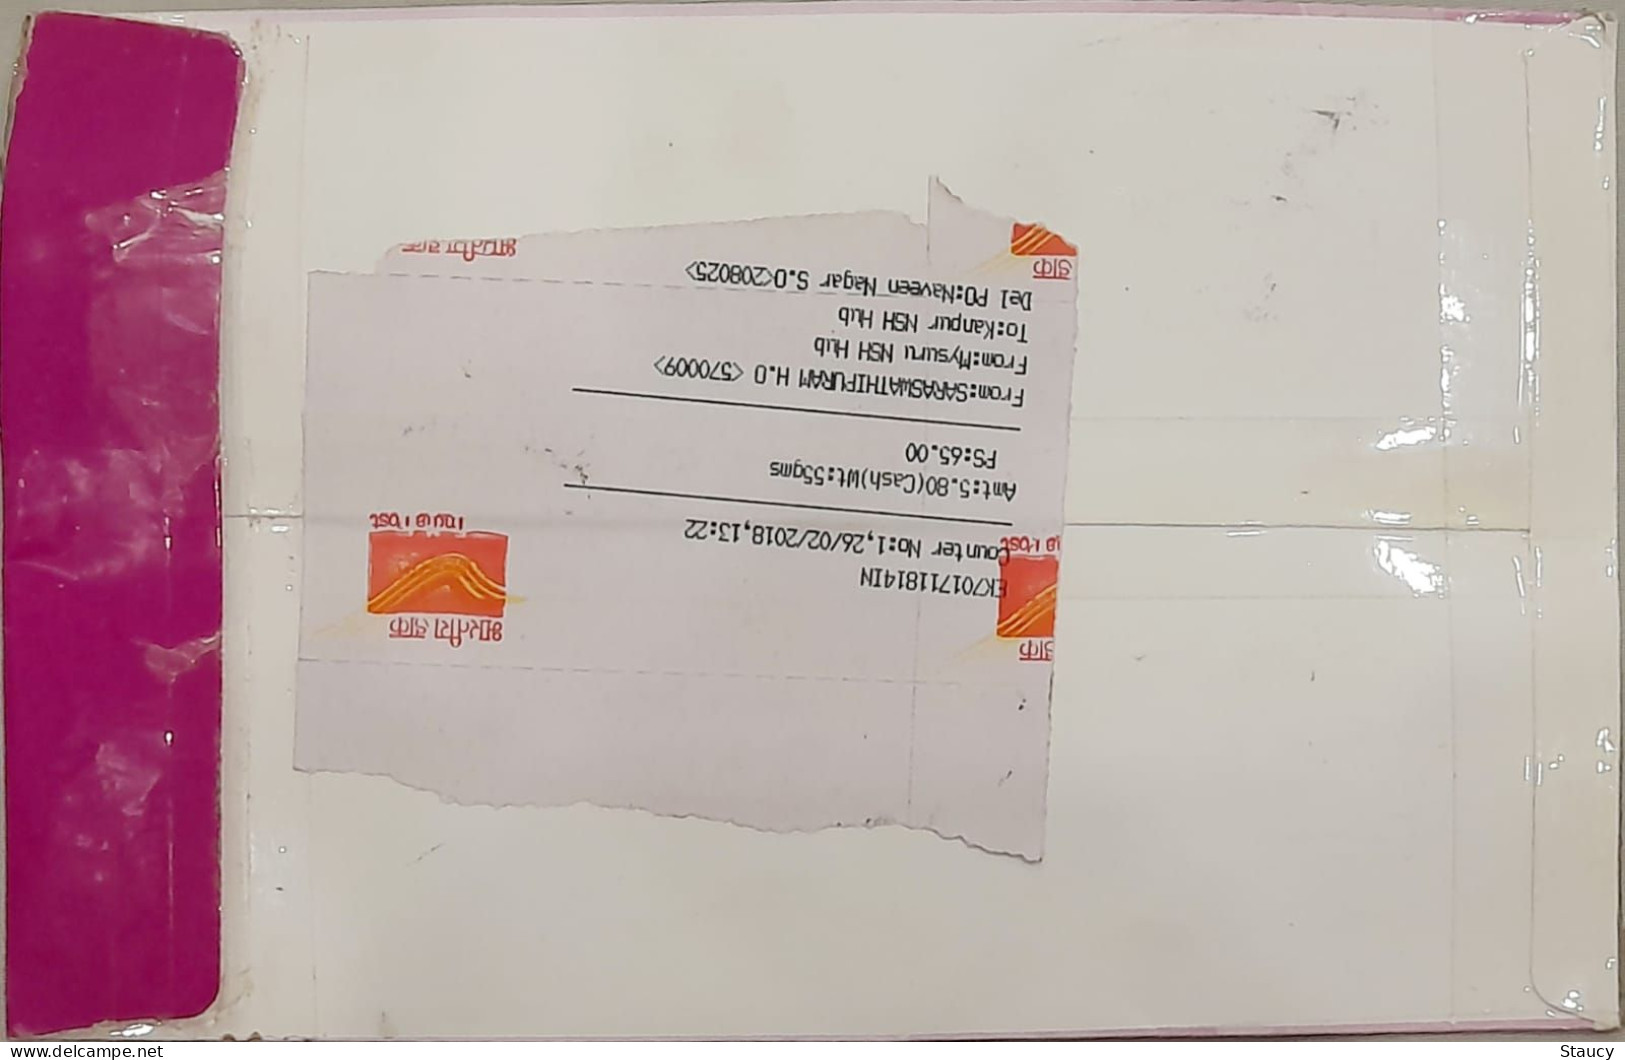 INDIA 2018 9 Stamps  Franked On Registered Speed Post Cover As Per Scan - Storia Postale